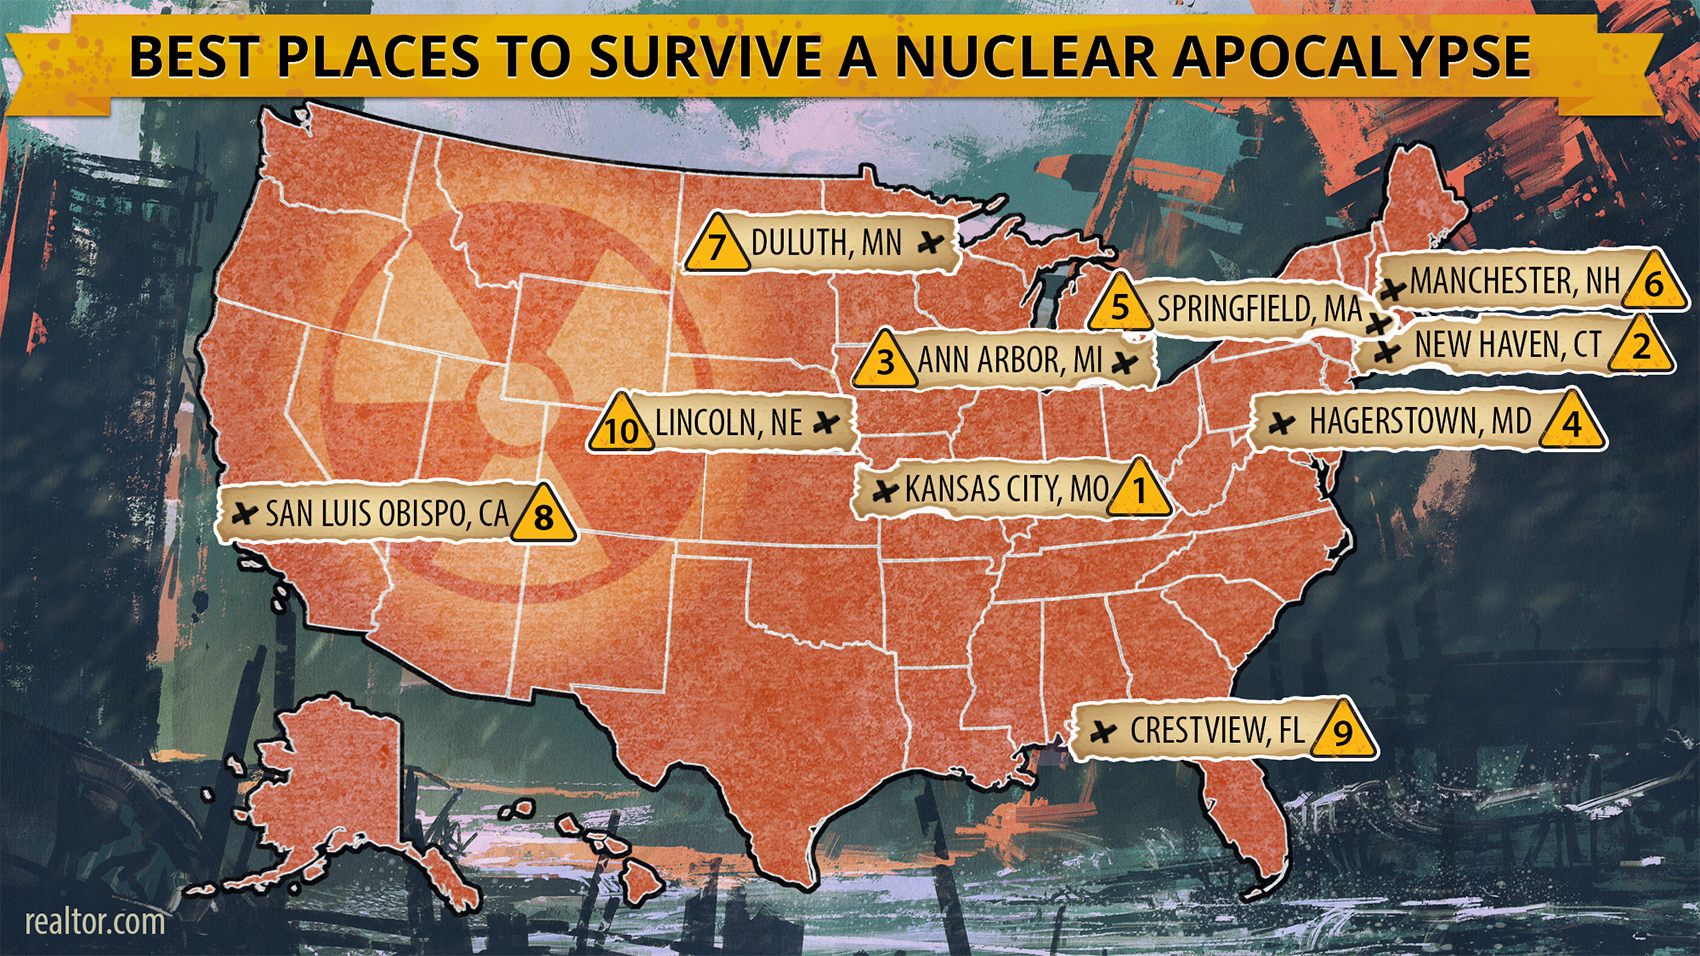 Want To Survive The Nuclear Apocalypse? Move To Kansas City